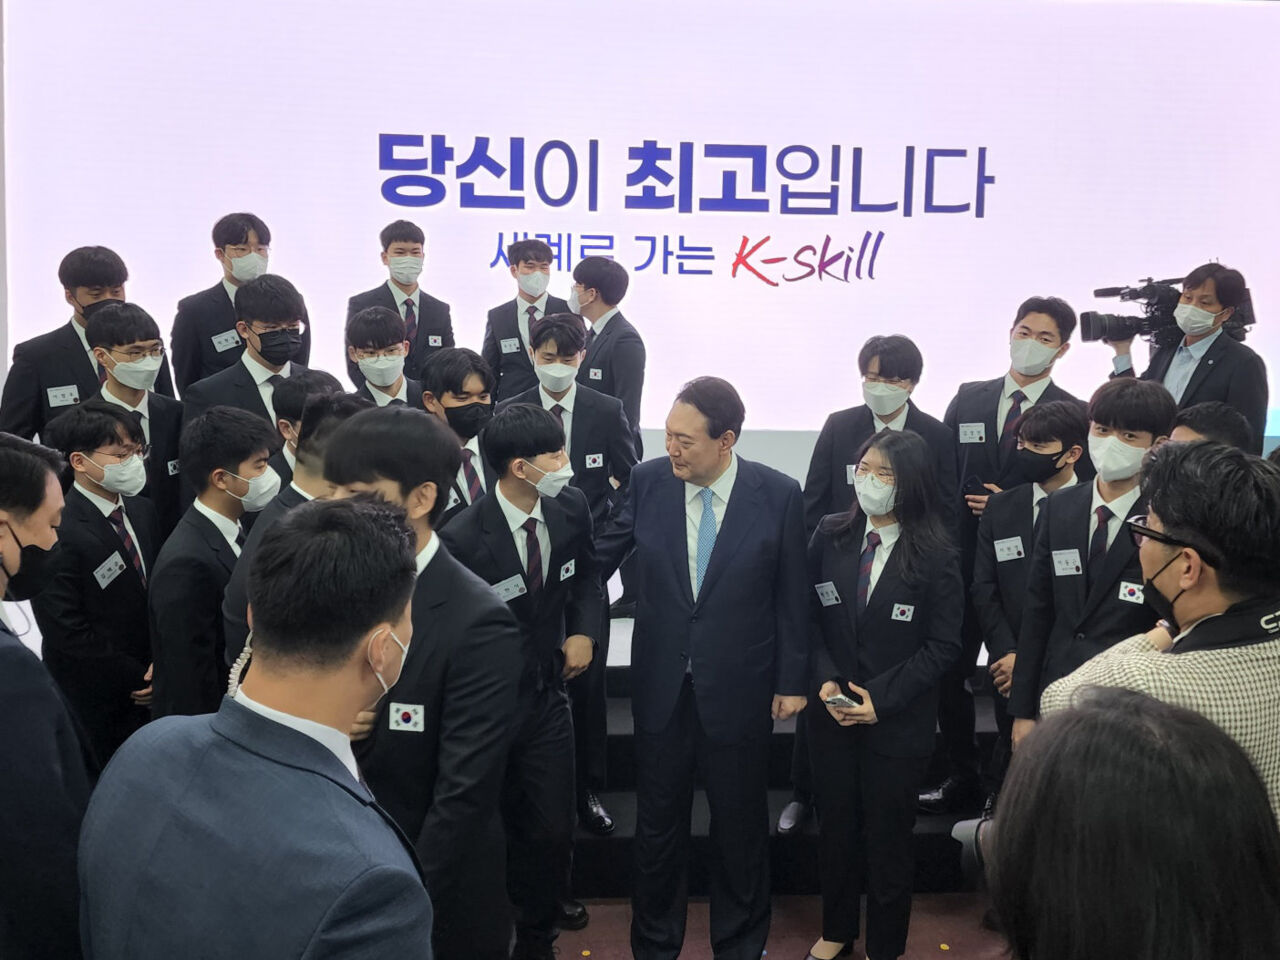 The President of Korea, Yoon Seok-yeol, meeting Korean Competitors during a visit to the Global Institute for Transferring Skills (GIFTS) in Incheon on 14 September 2022. 